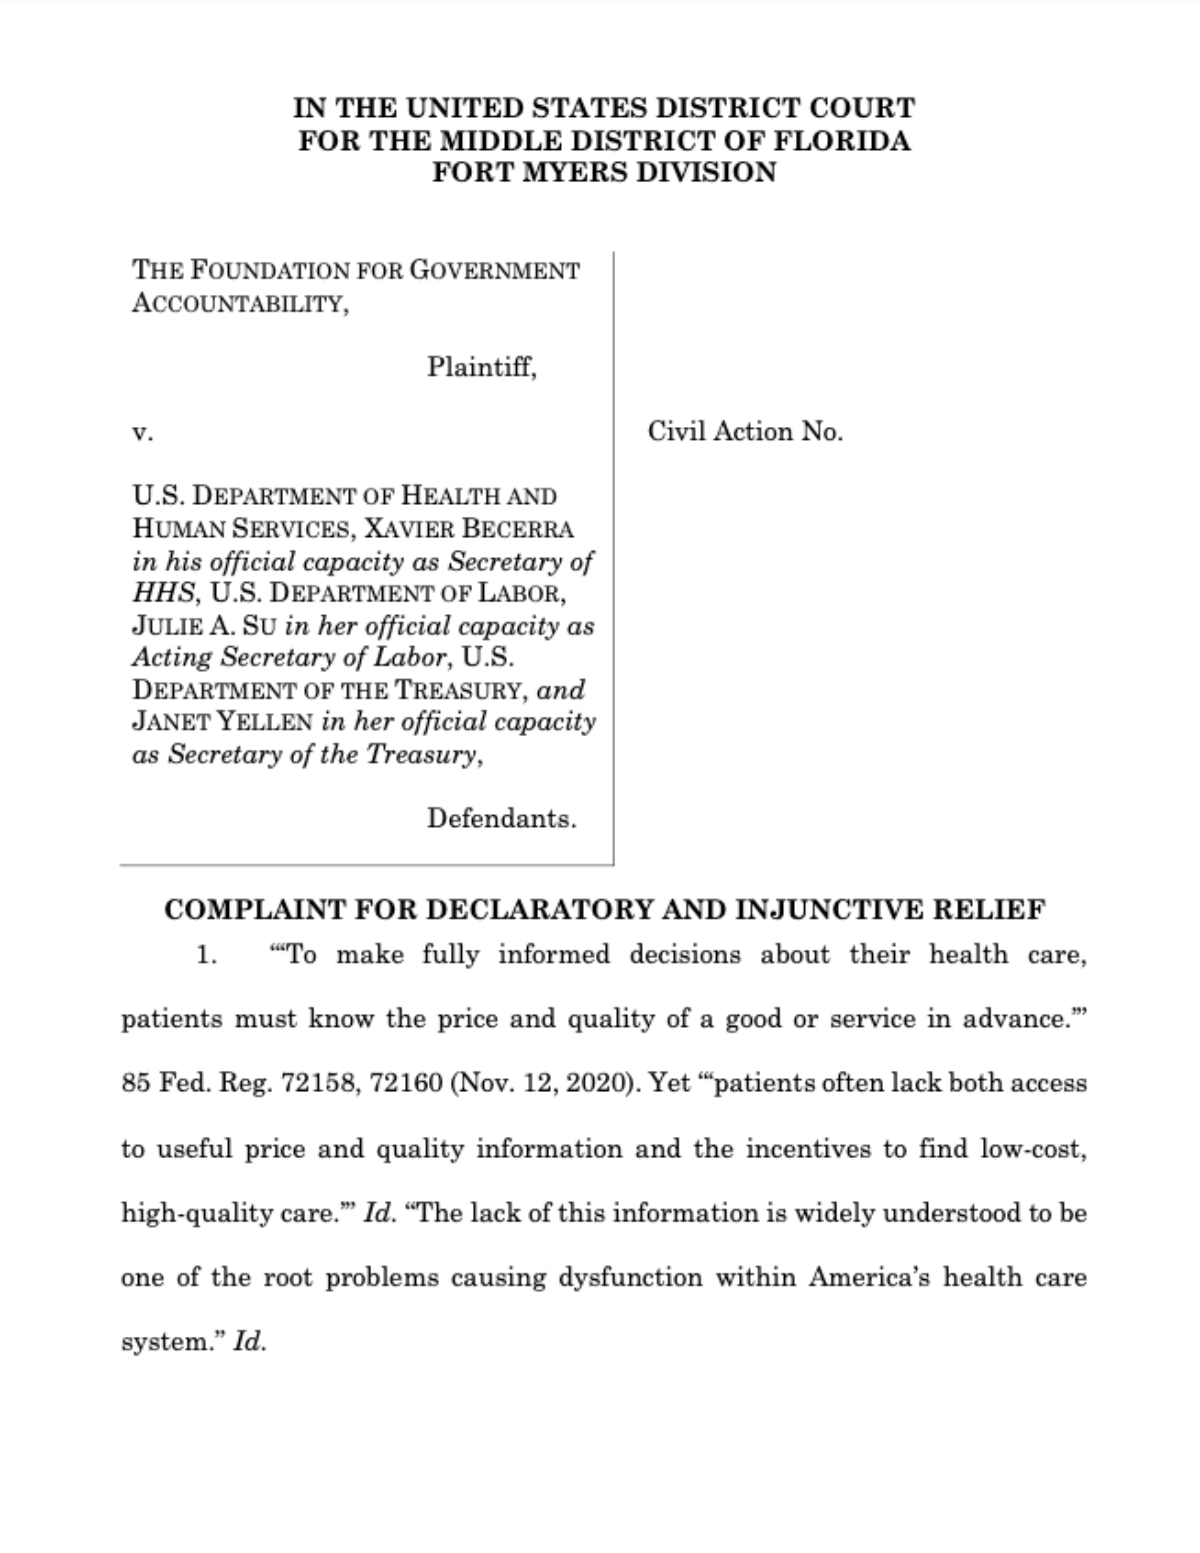 FGA Lawsuit Filed in Federal Court Against Biden Officials to Enforce Drug Price Transparency Rule